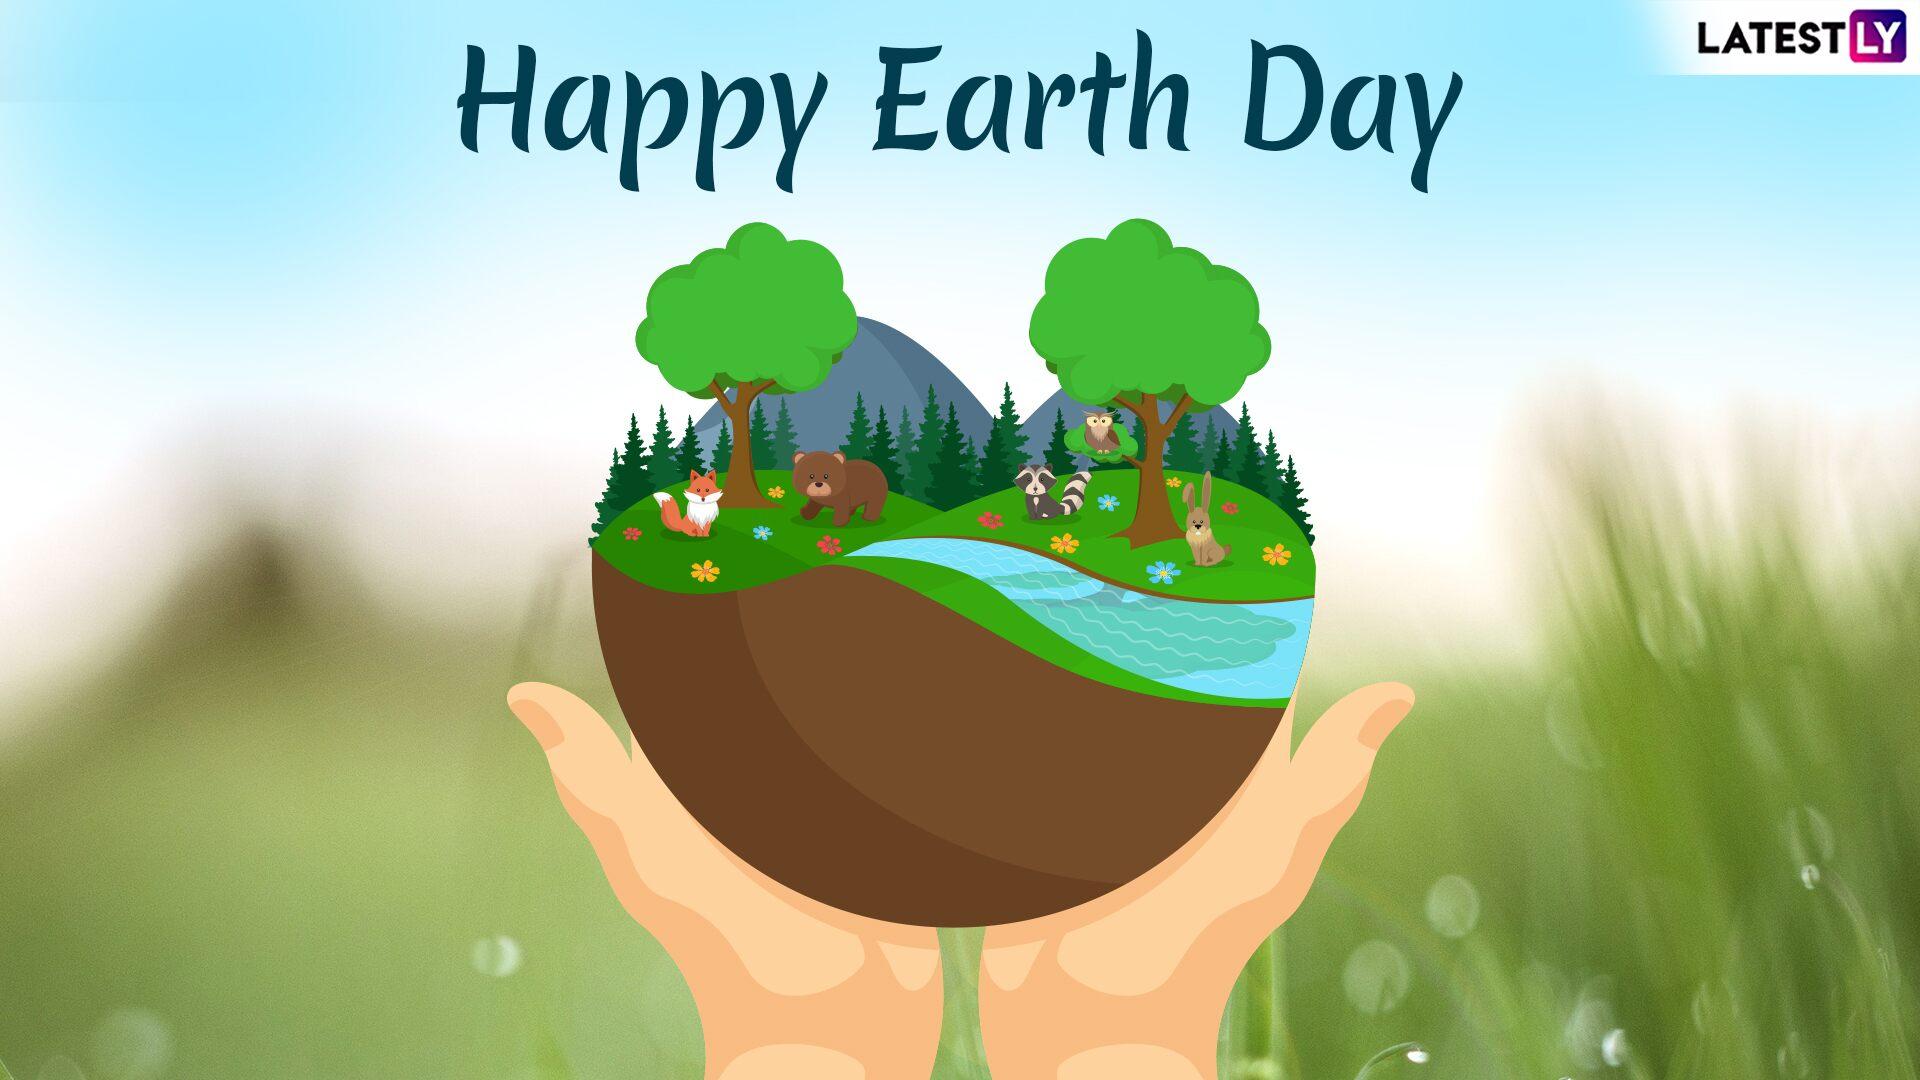 Earth Day 2019 Image & HD Wallpaper for Free Download Online: Wish